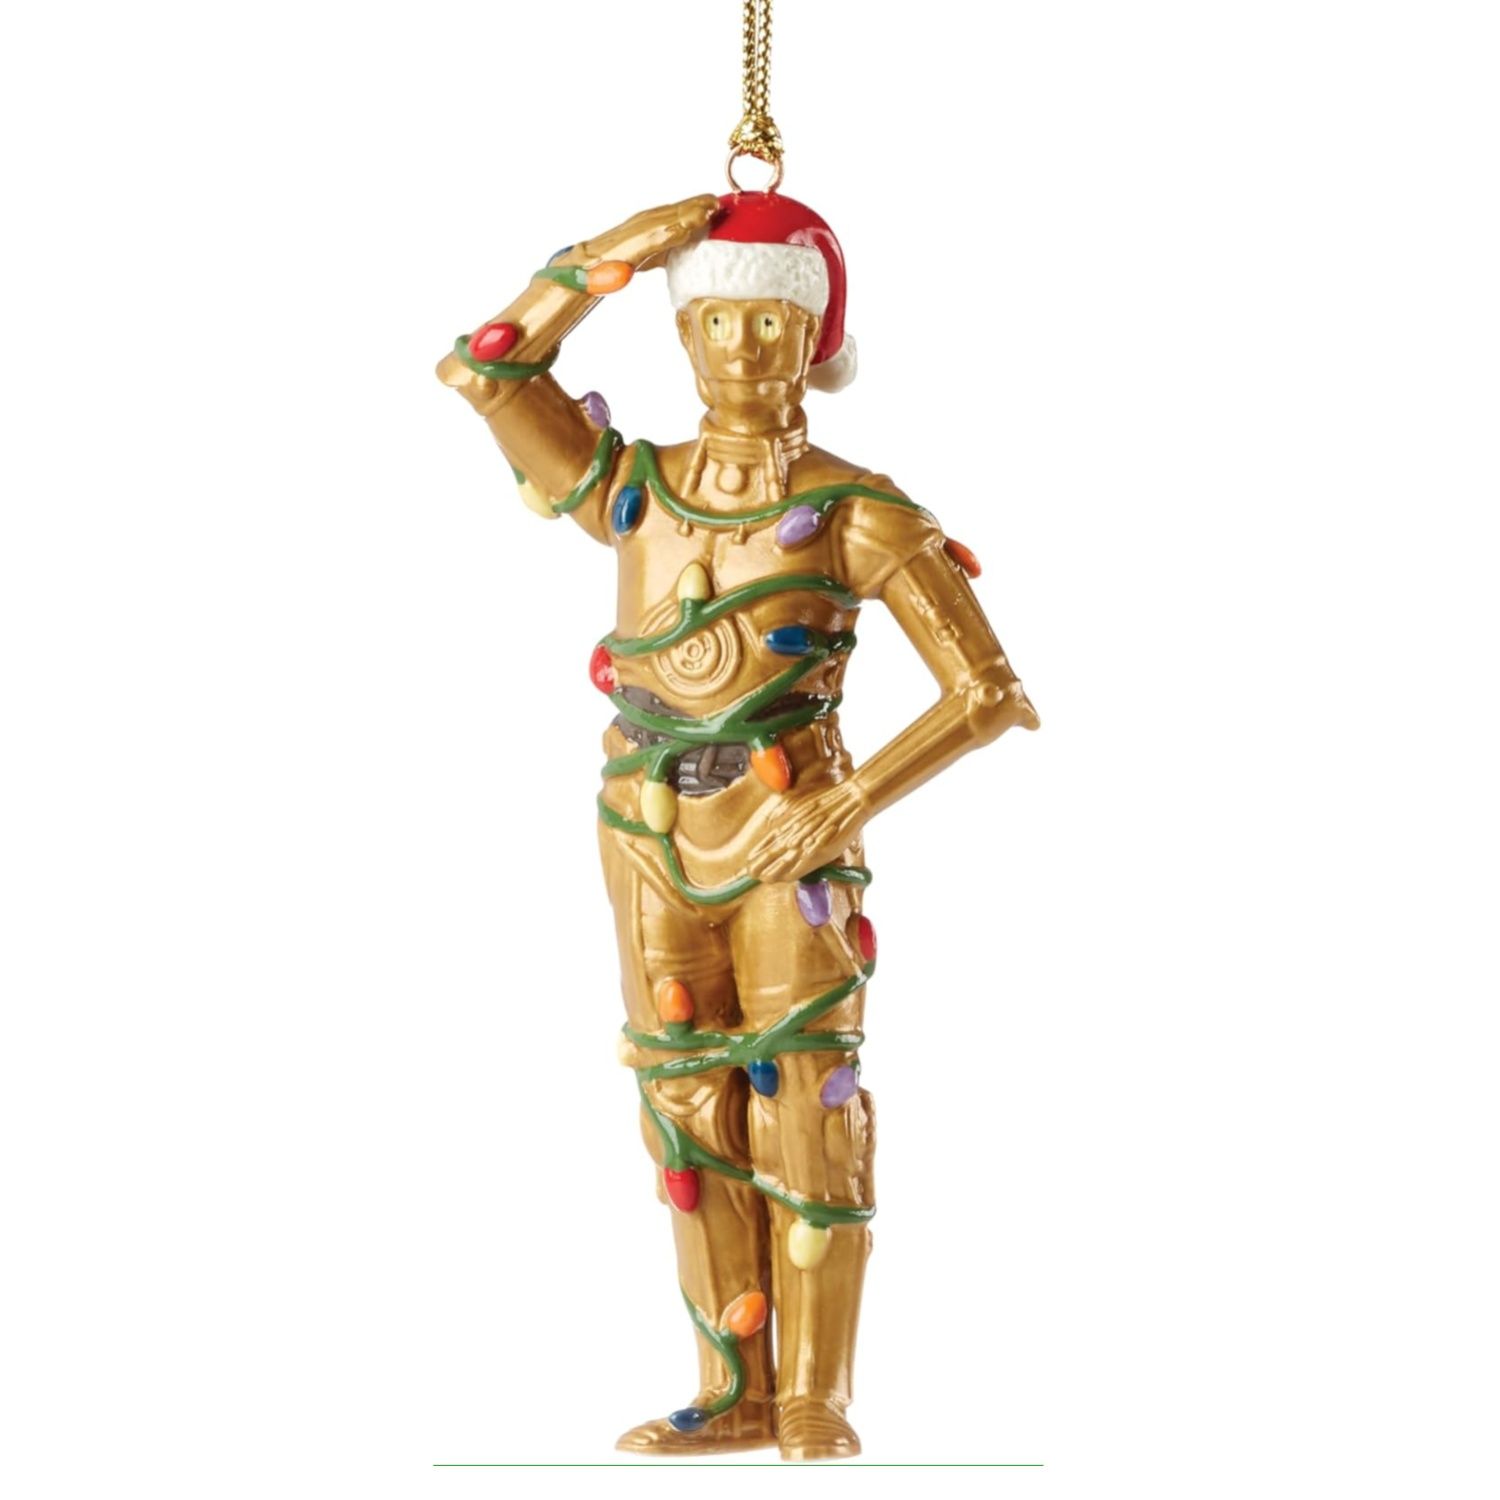 This ornament features C-3PO in a Santa hat and tangled up in Christmas lights